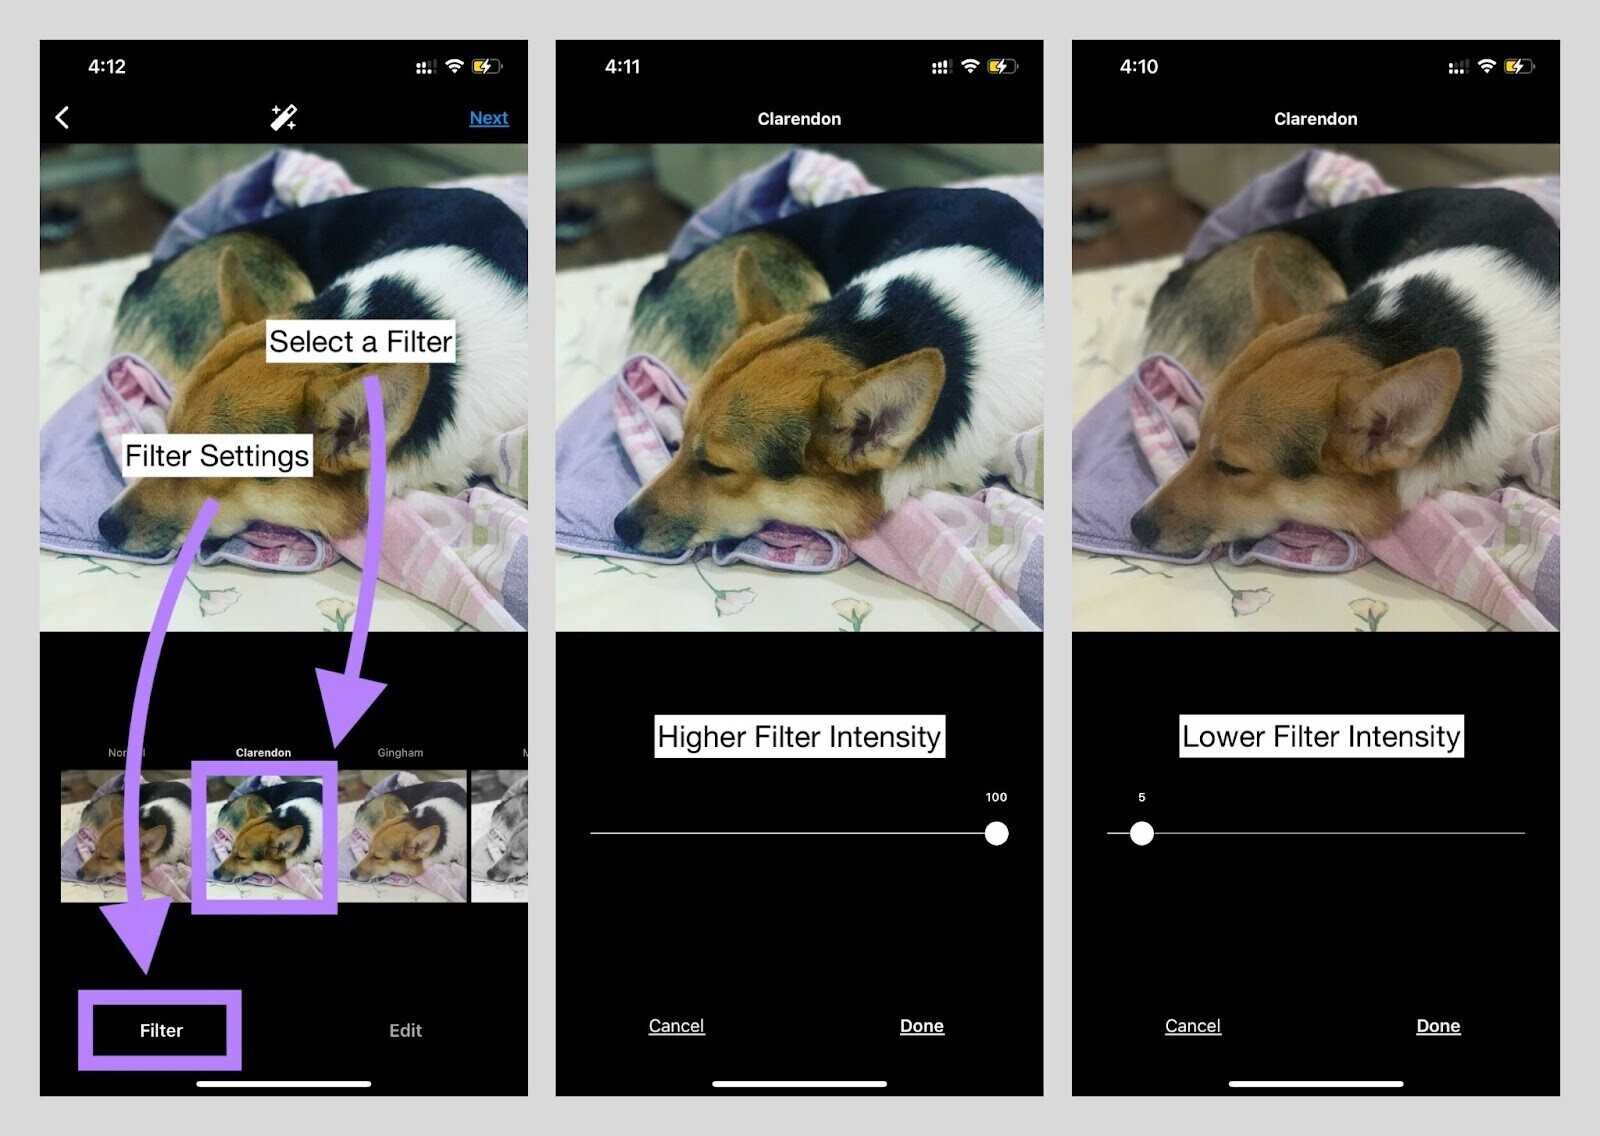 using “Filter Settings” and selecting a filter on Instagram